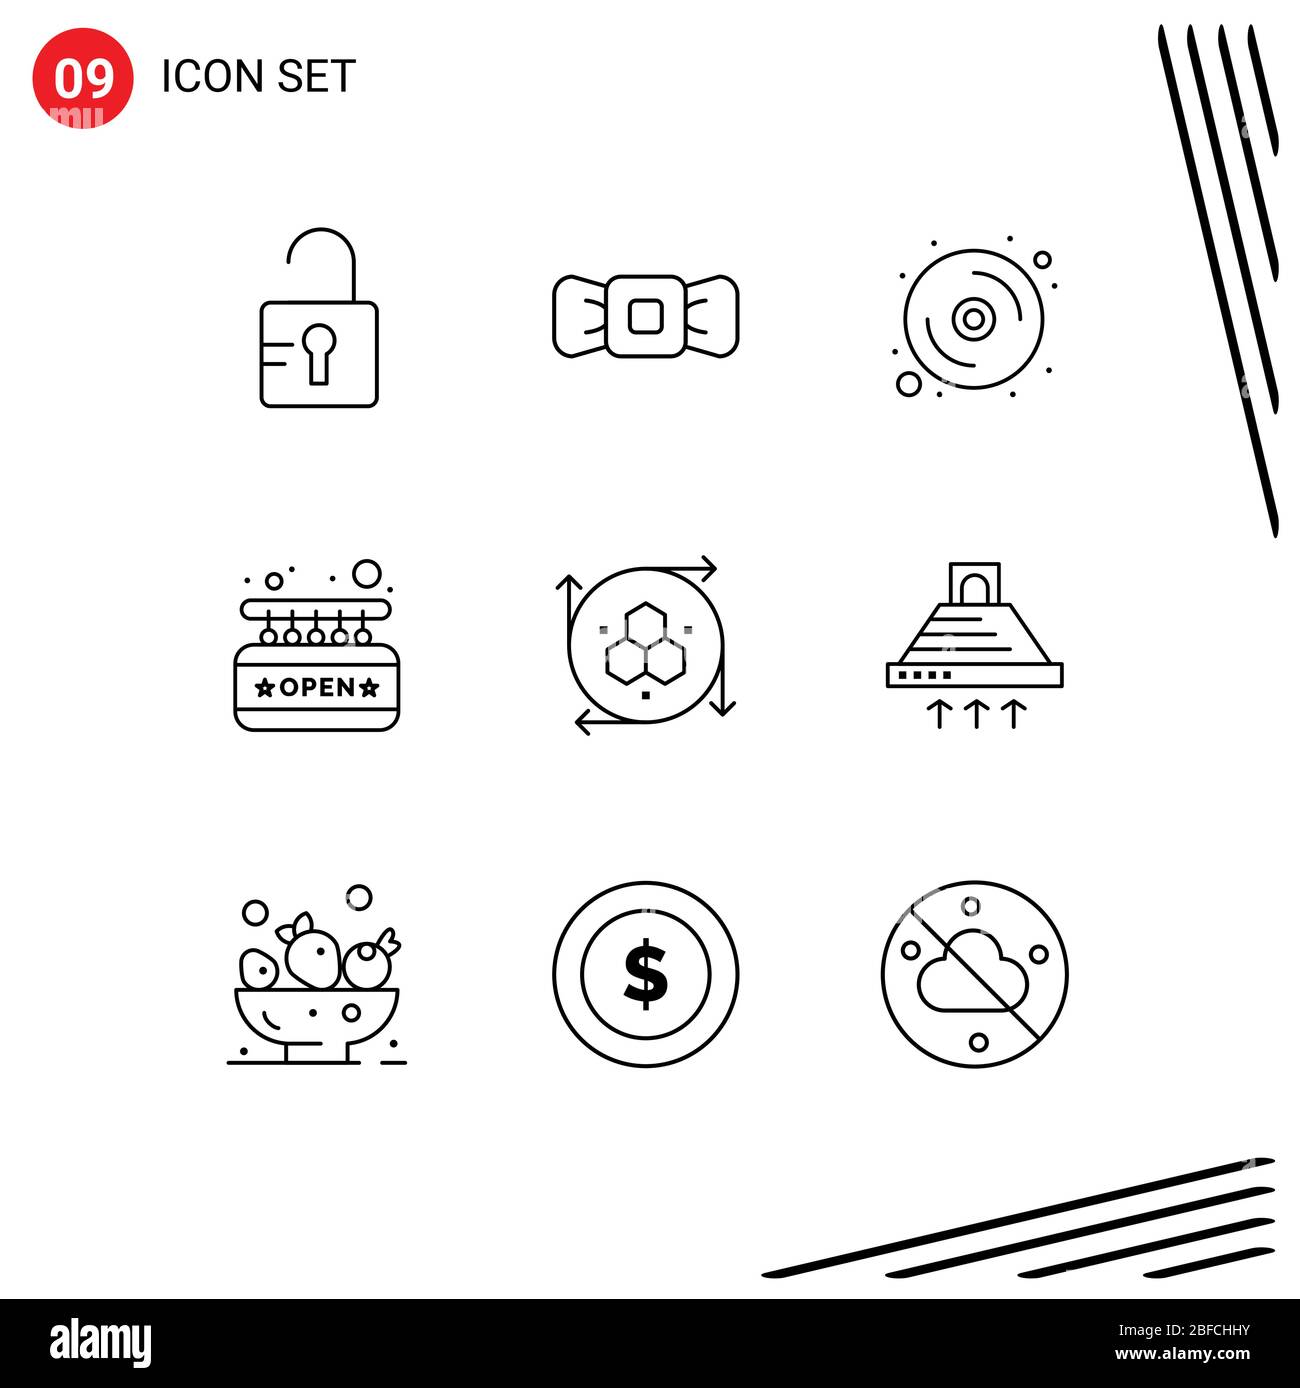 Pictogram Set of 9 Simple Outlines of modeling application, computer graphics, data, sign board, open Editable Vector Design Elements Stock Vector